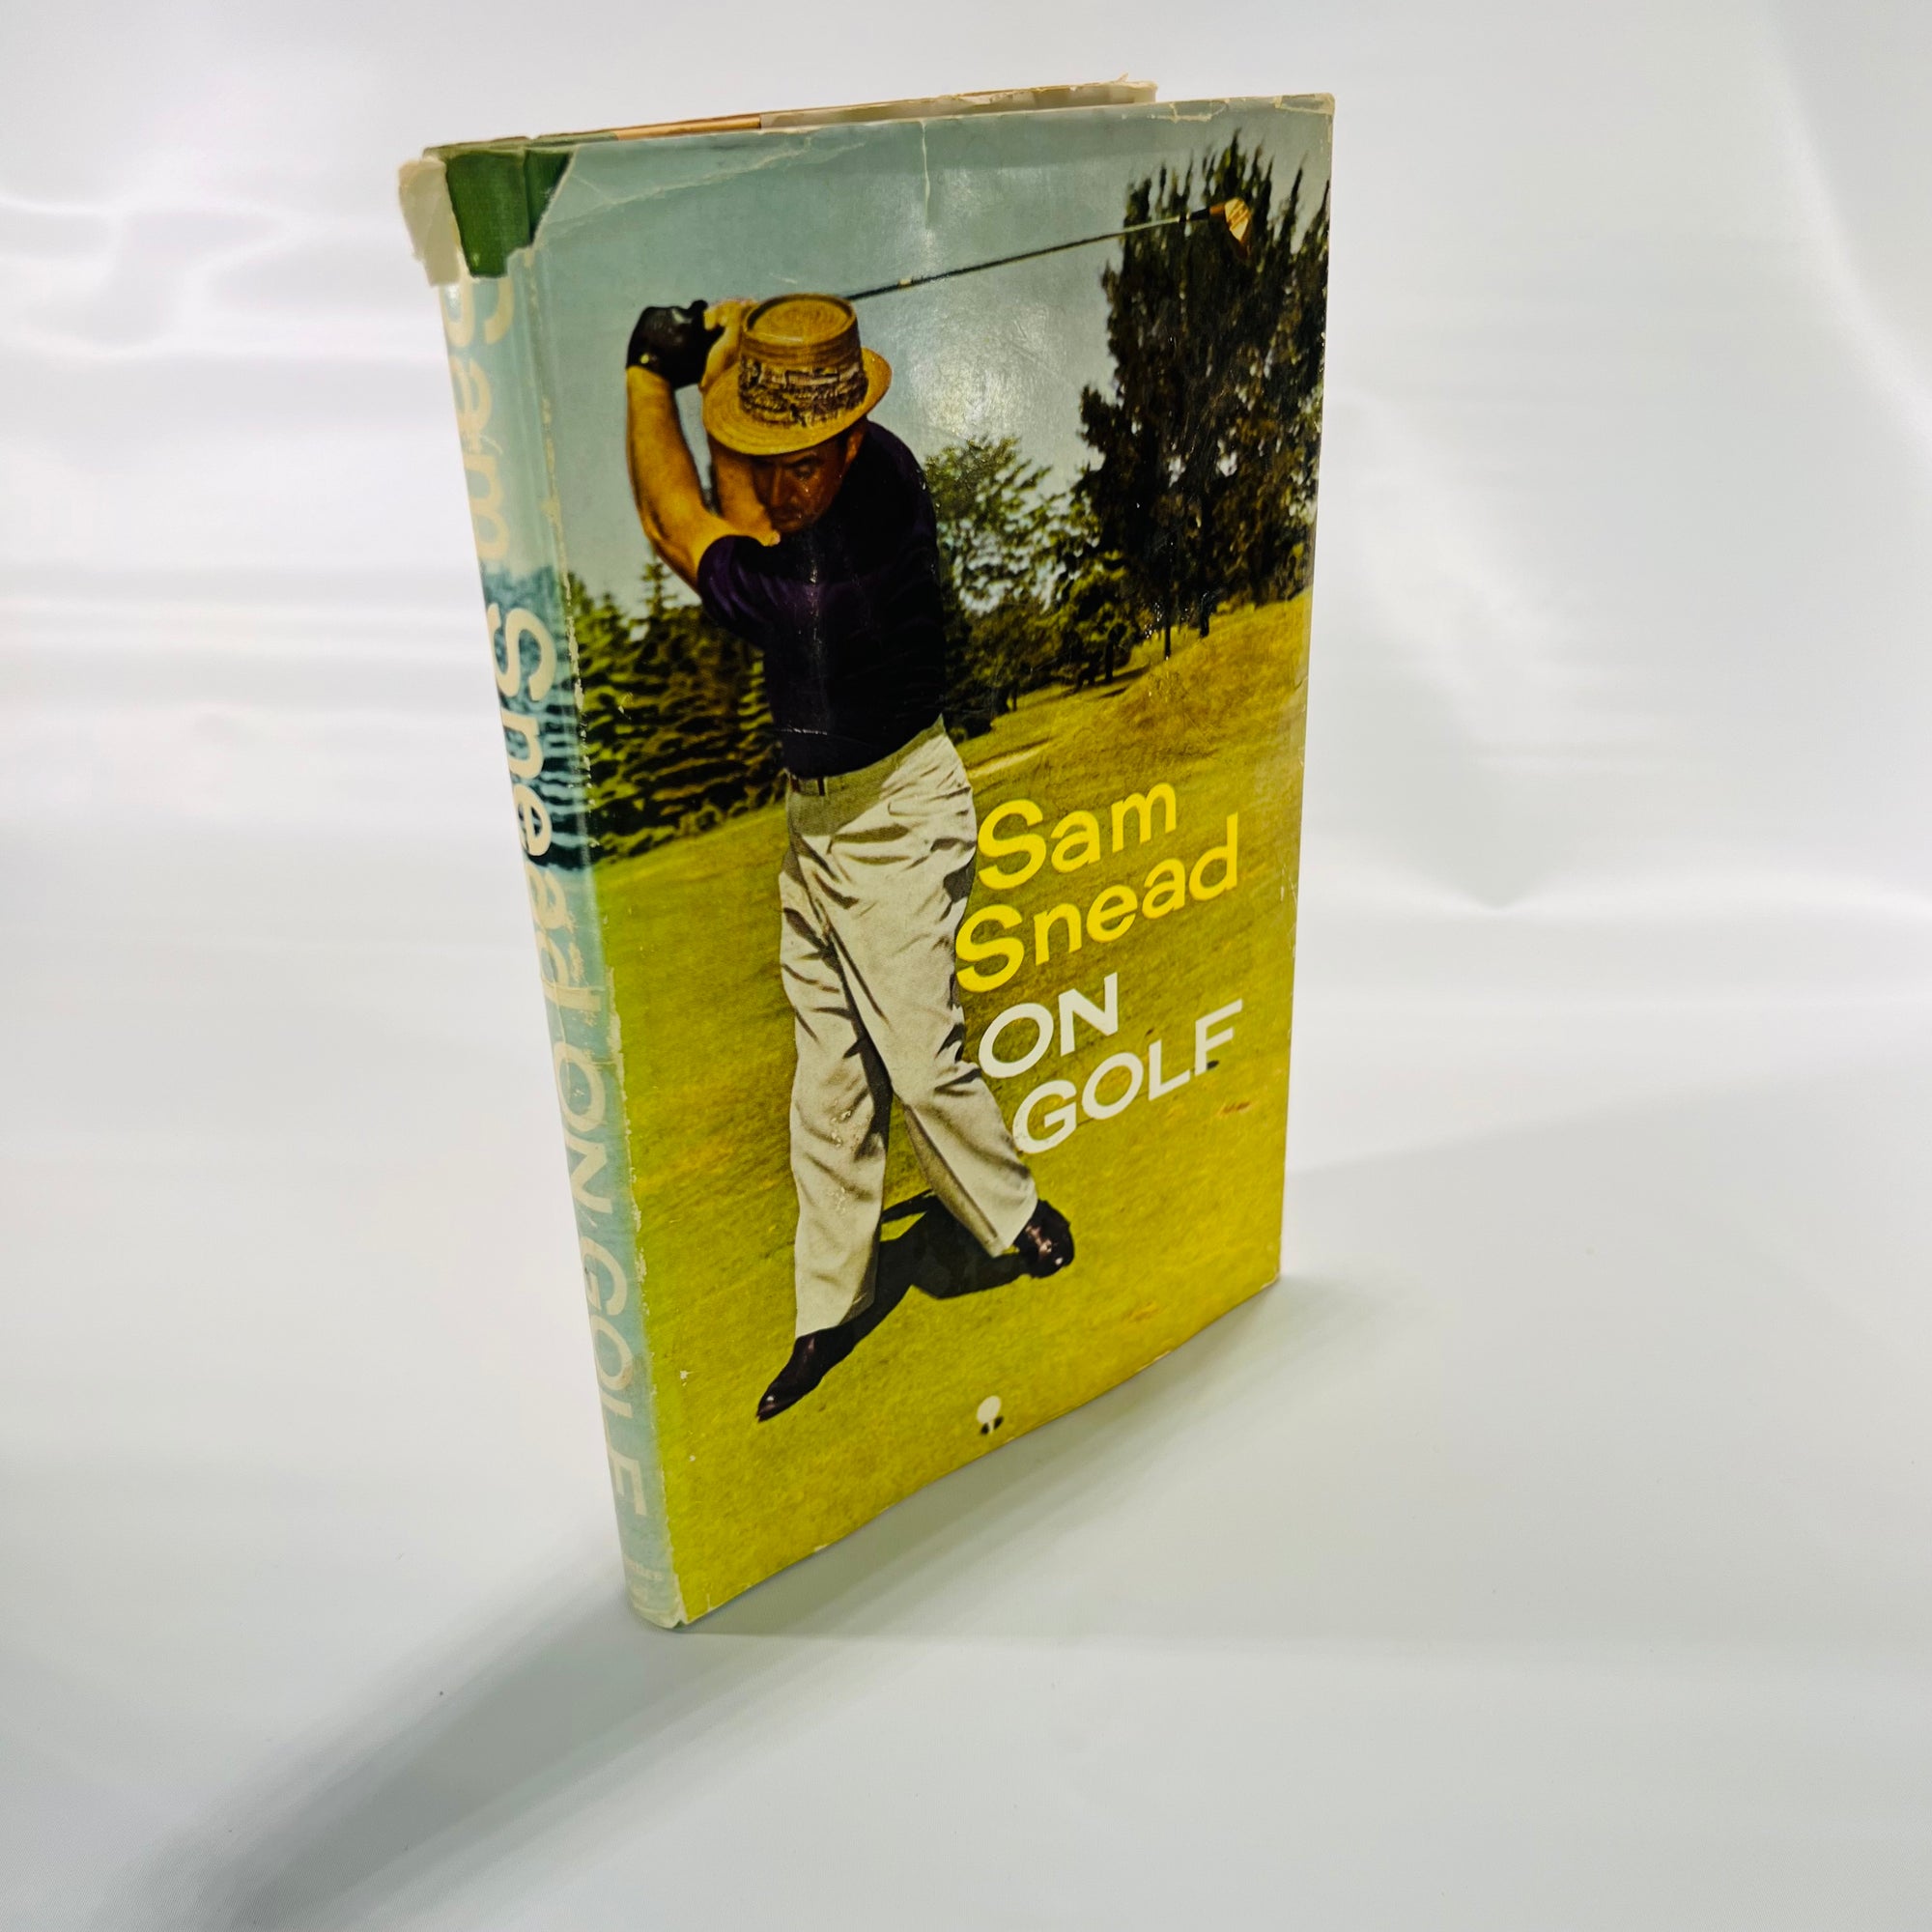 Sam Snead on Golf by Sam Snead Photography by Charles Yerkow 1961 Prentice Hall, Inc